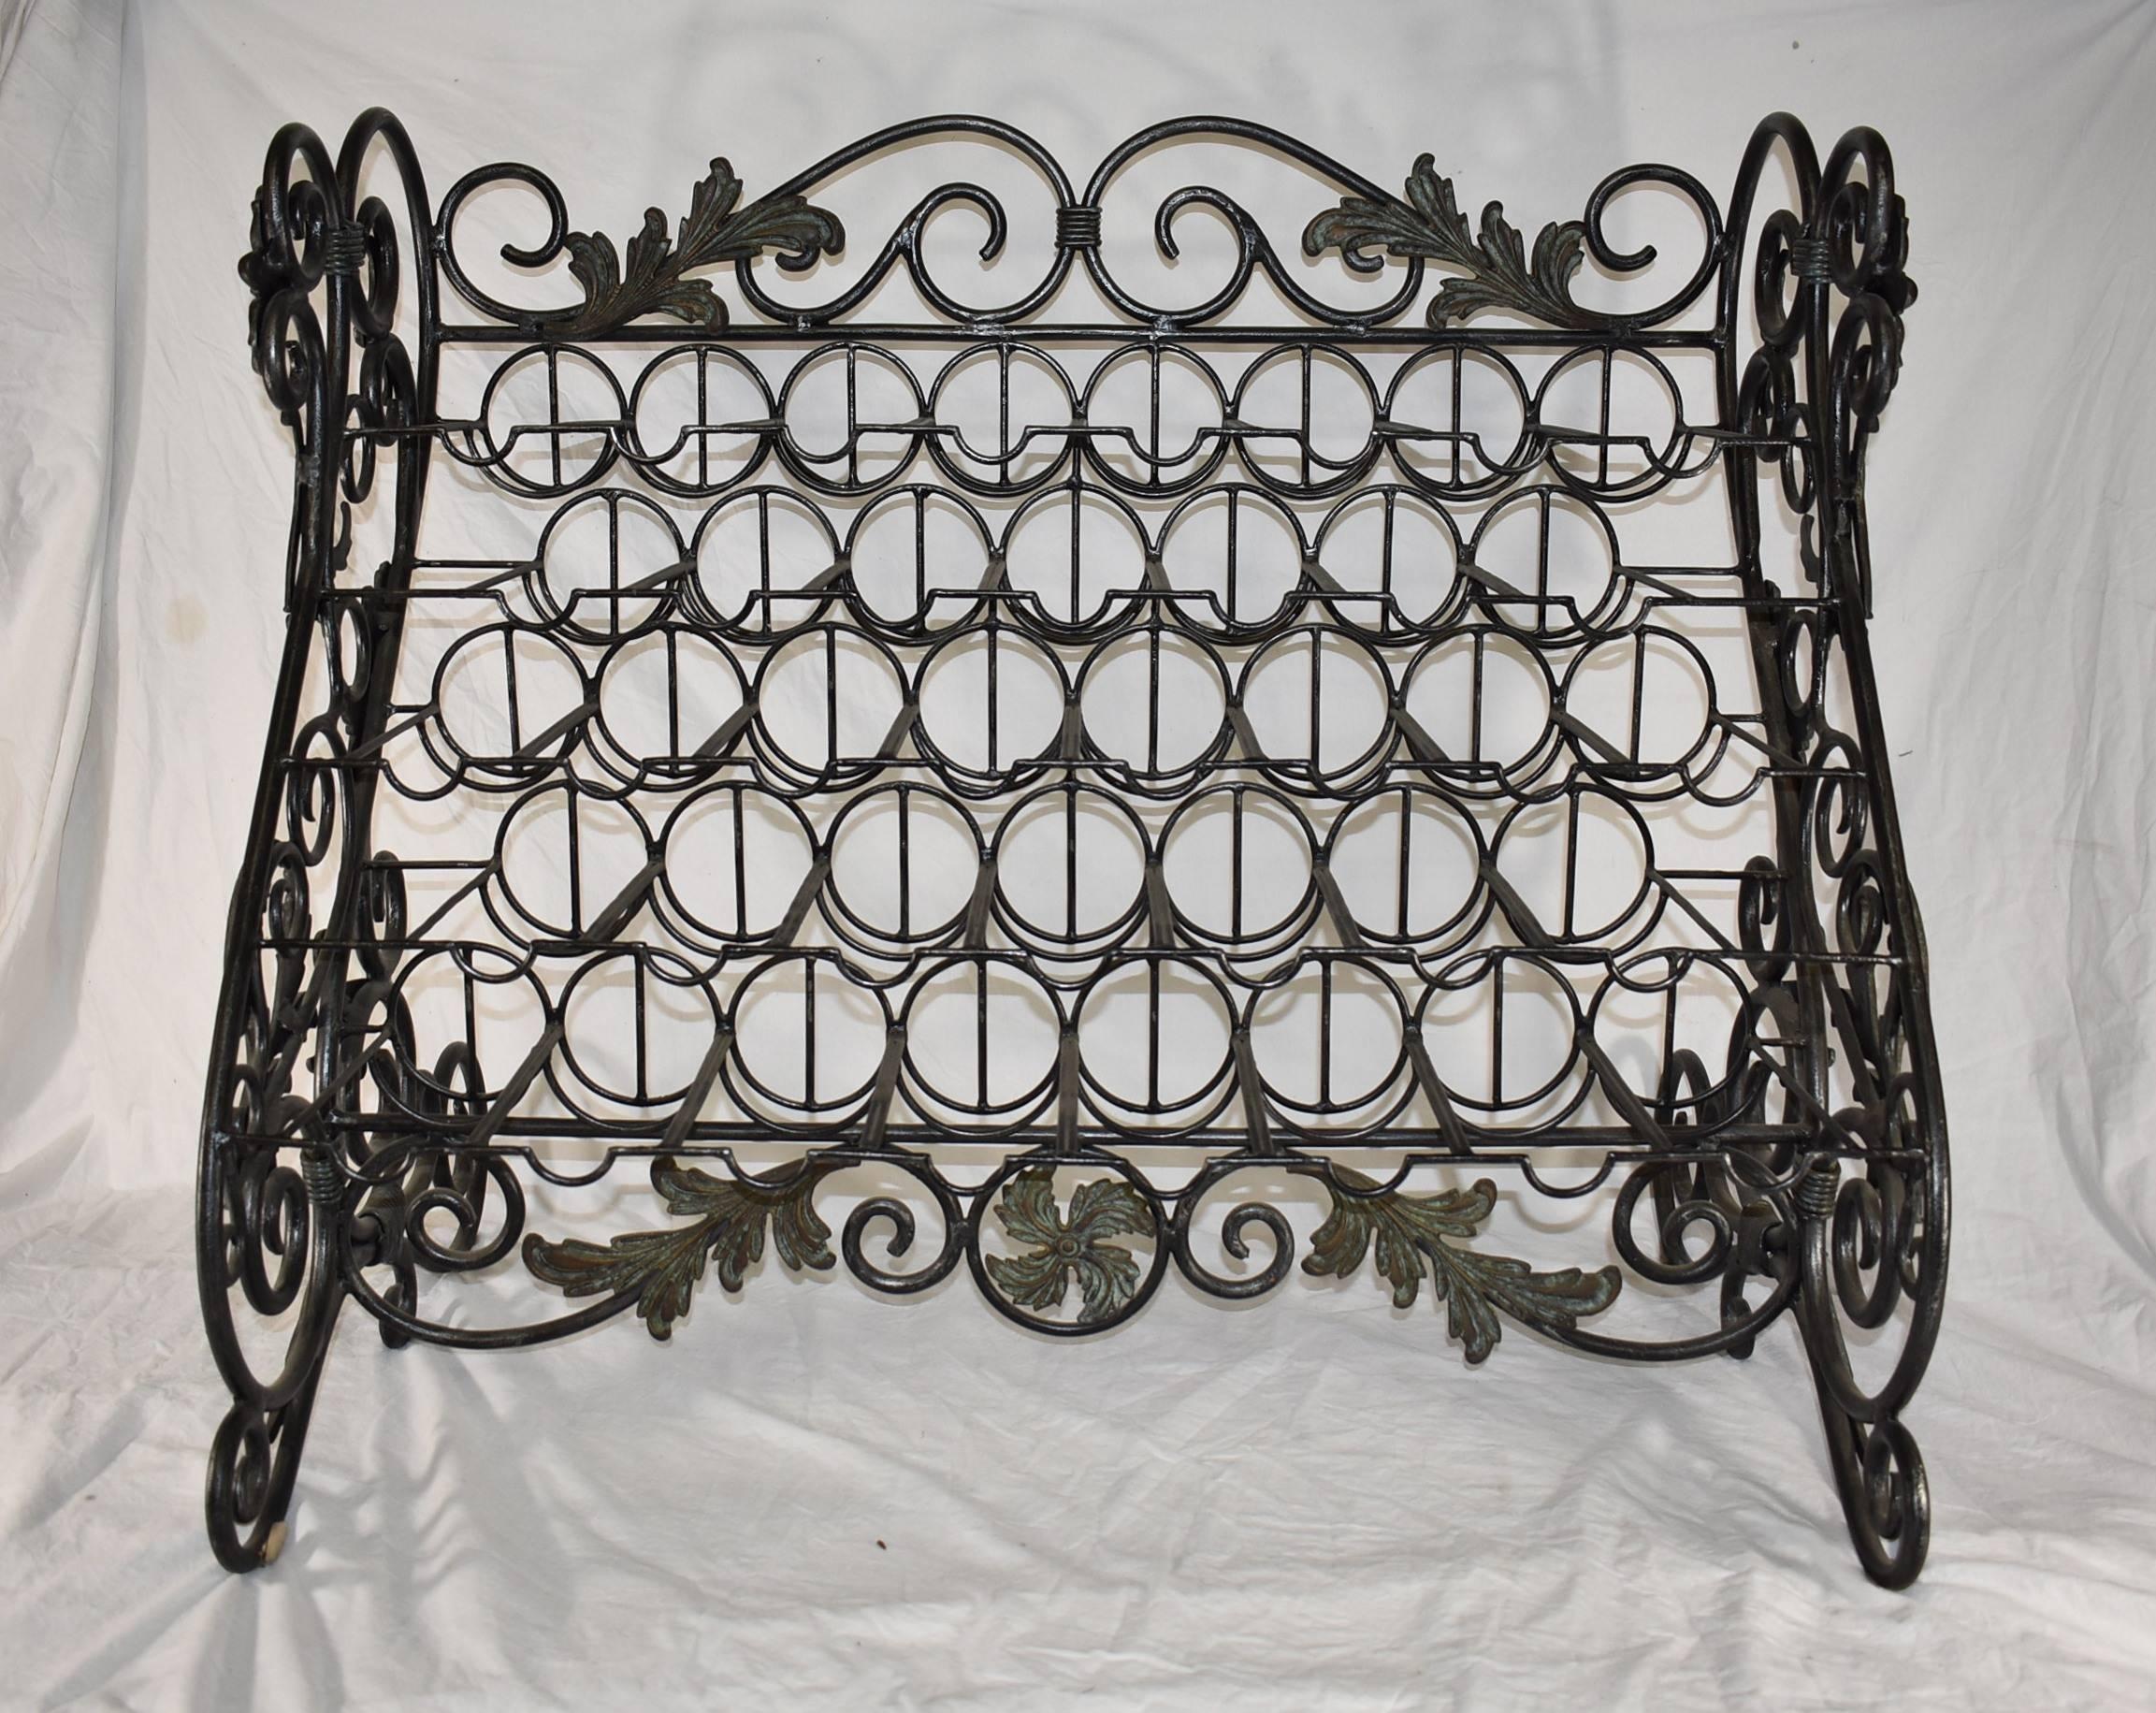 An unusual 38 bottle iron wine rack by Maitland-Smith. The sides are done in scroll work with leafs accents. A verdigris patina has been applied as accent. Original Maitland-Smith stick is on the back of the central medallion at bottom. Dimensions